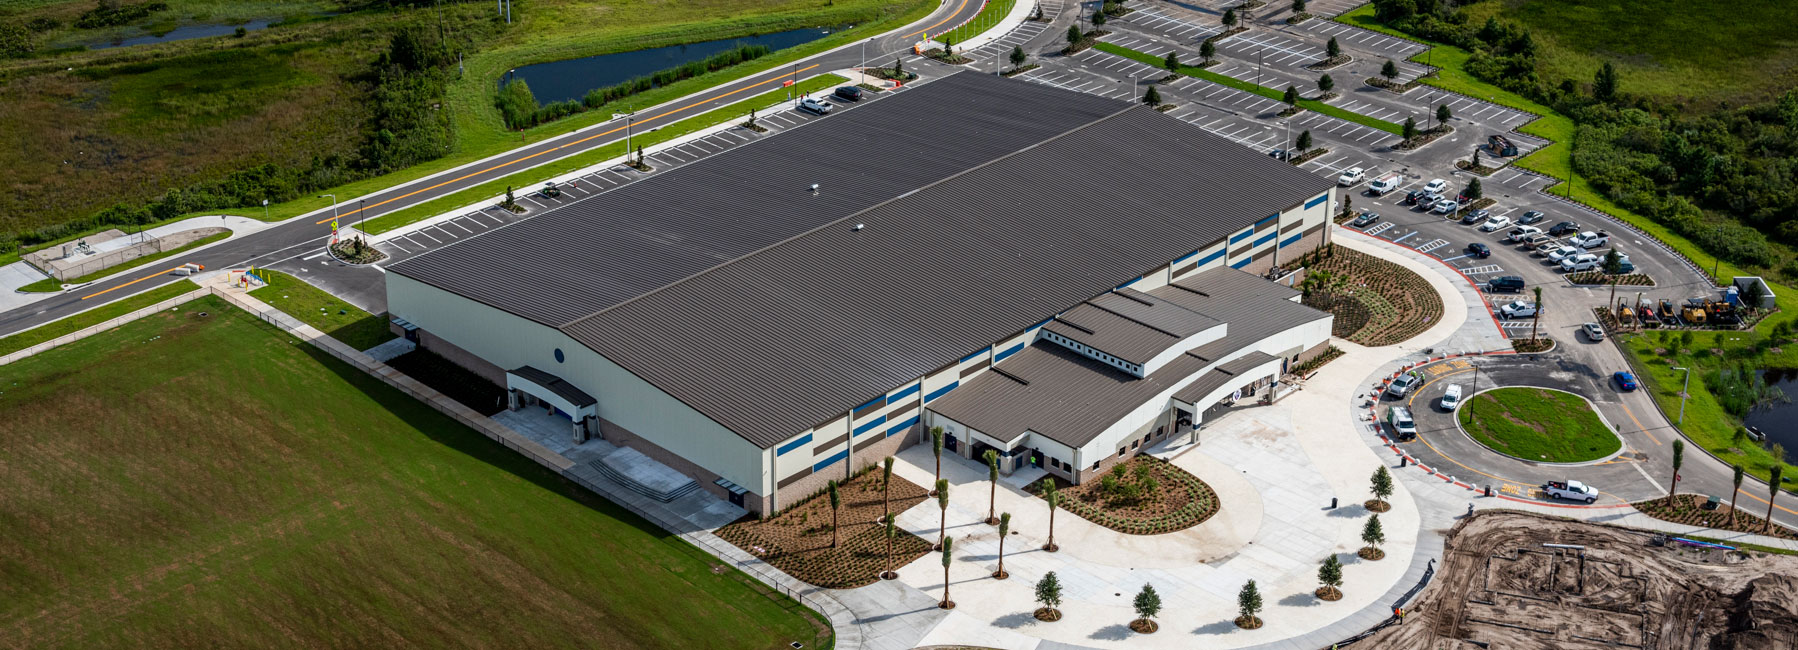 GO to Ceco Building Systems, 2020 Building of the Year – Wiregrass Ranch Sports Campus of Pasco County